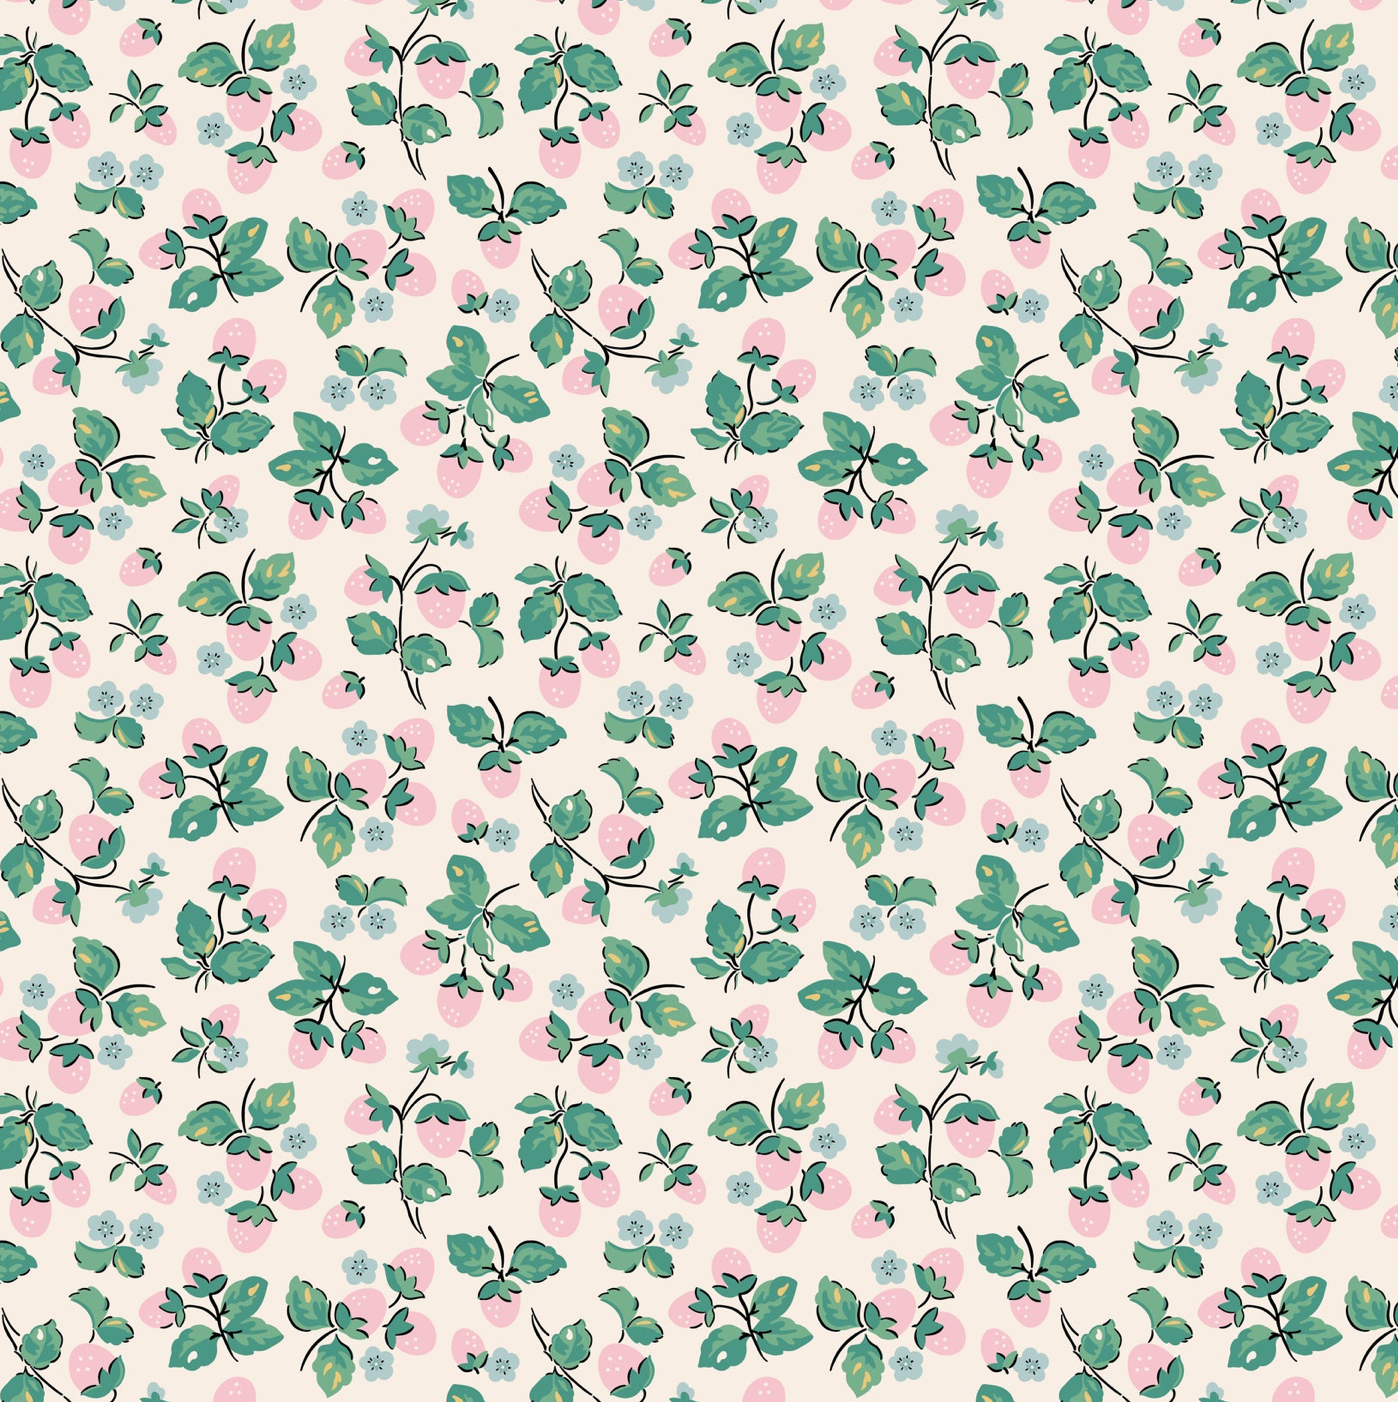 Home Sweet Home Strawberry Cake Cream VR24454, Sold by 1/2 yard, *PREORDER